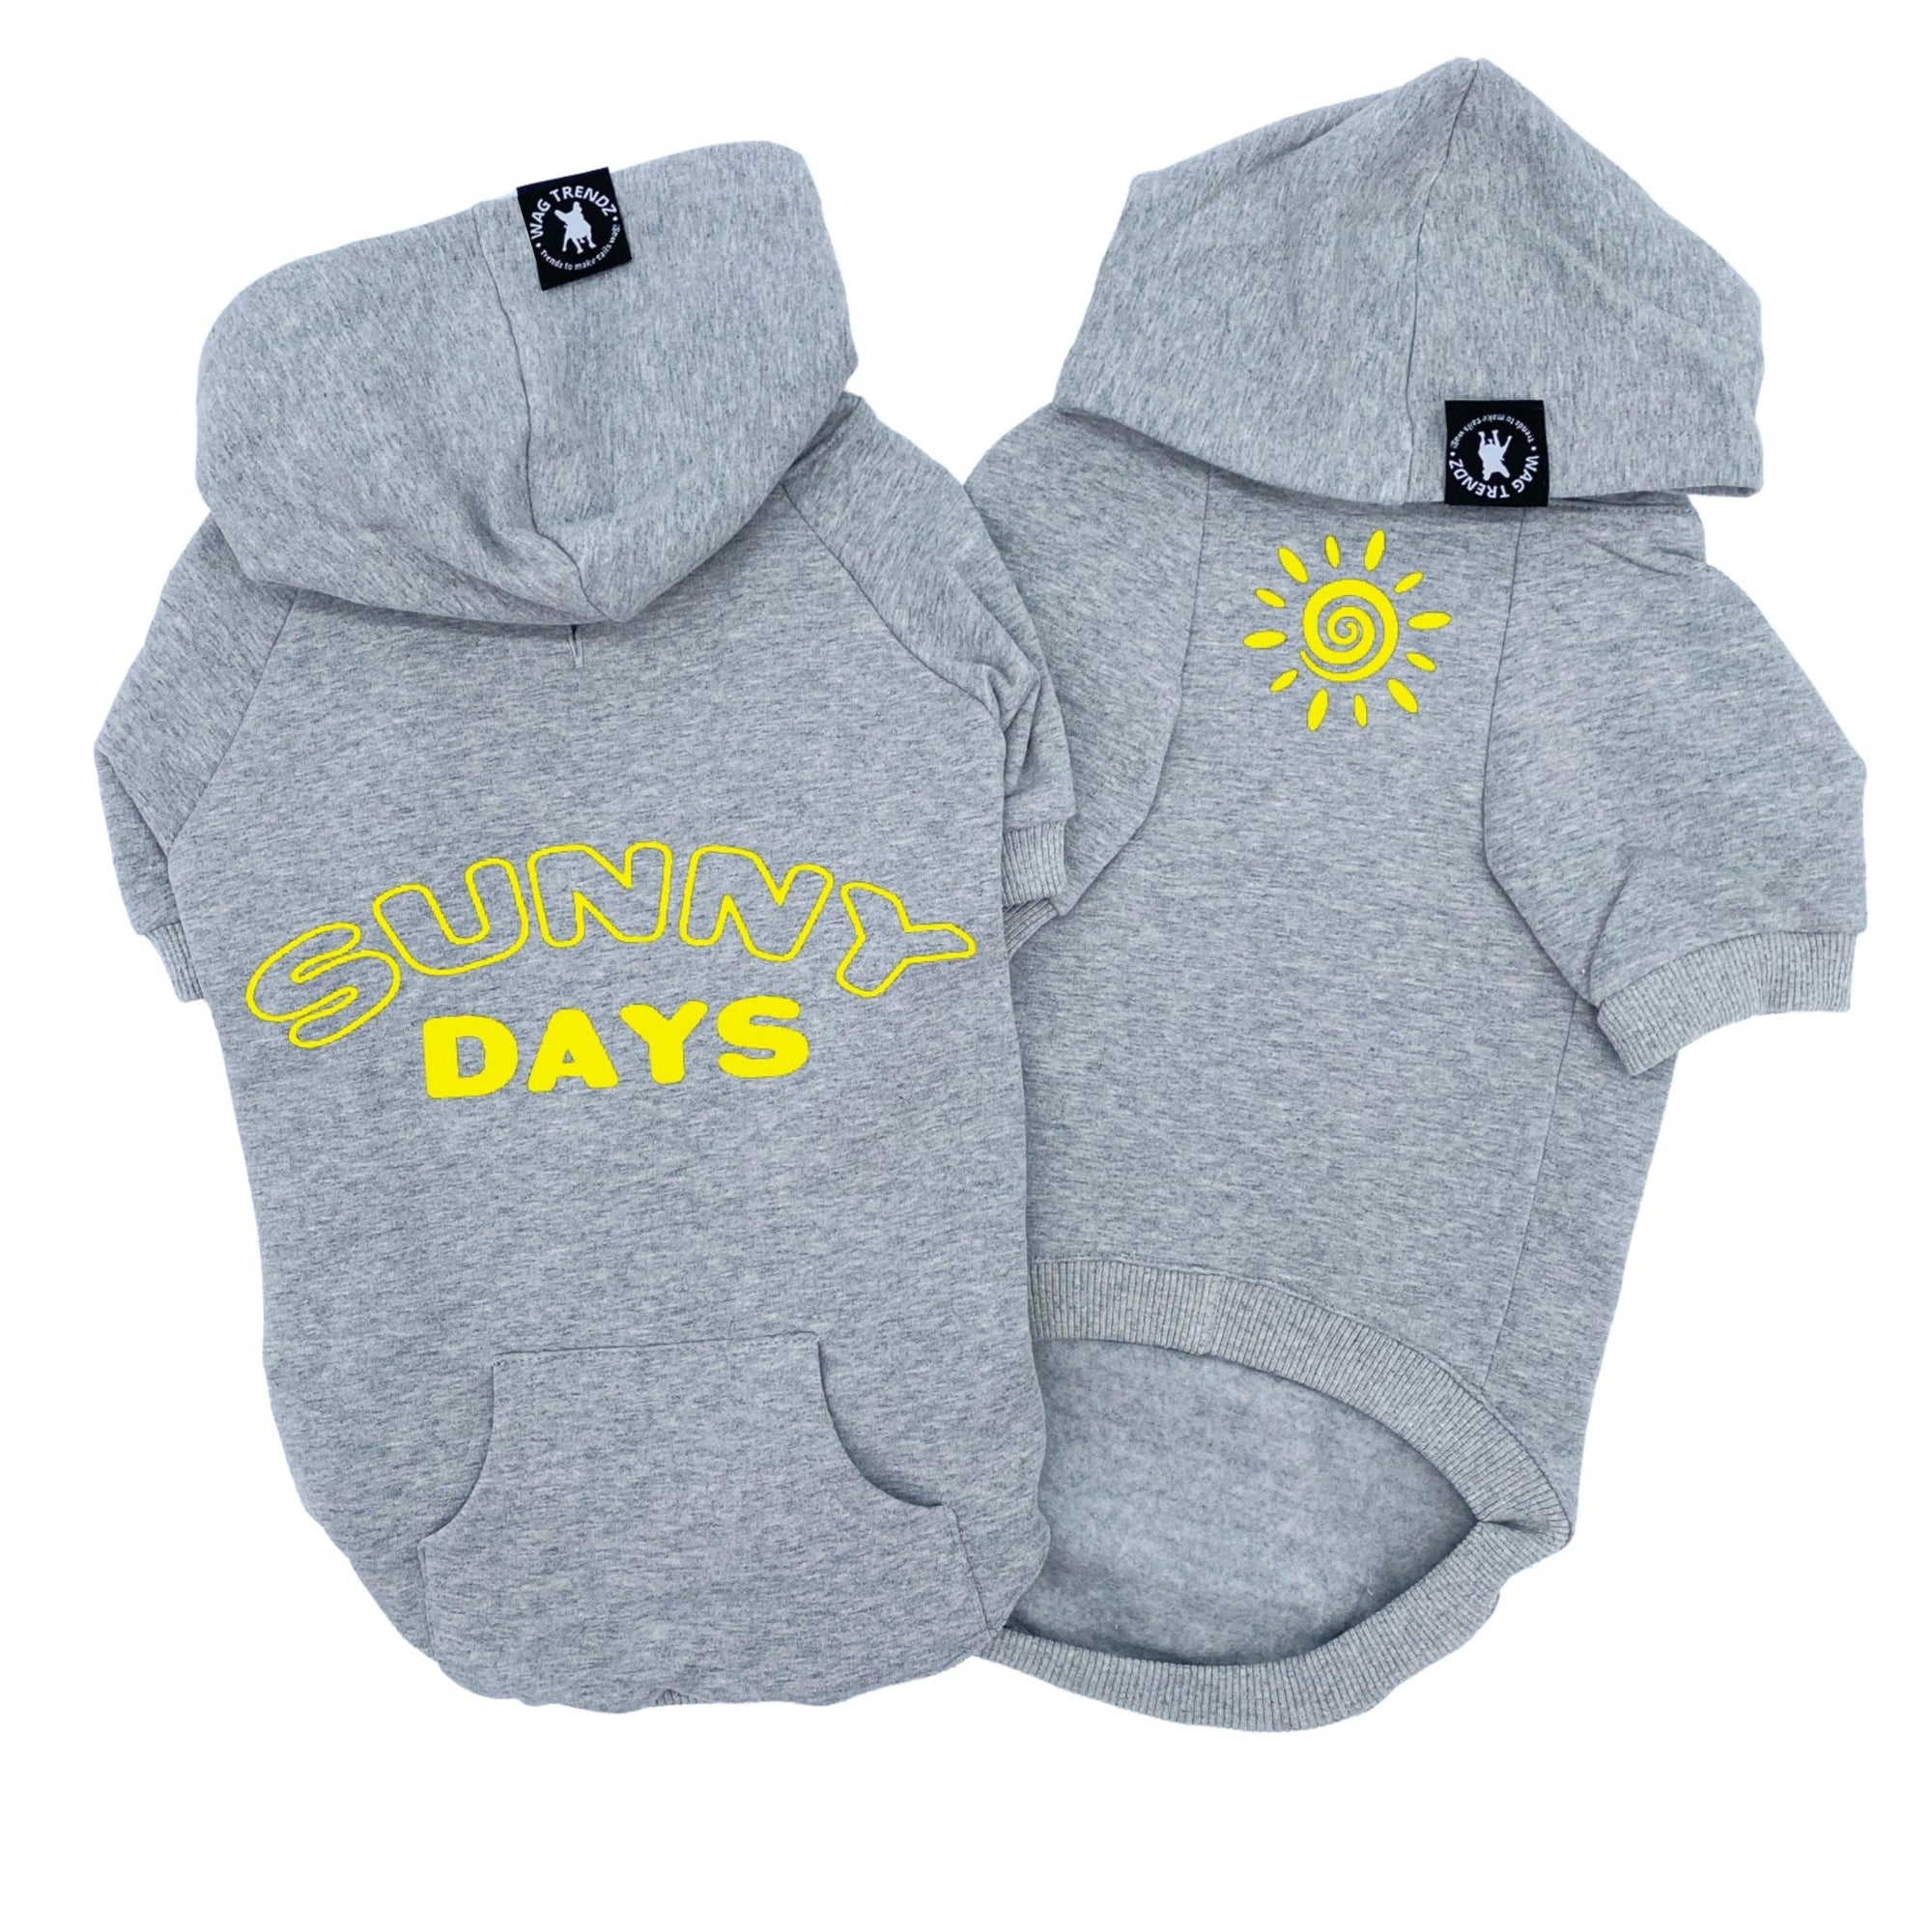 Dog hoodie - Hoodies For Dogs - &quot;Sunny Days&quot; dog hoodies in gray set - back view says Sunny Days in yellow and front view has a modern yellow sunshine emoji - against solid white background - Wag Trendz